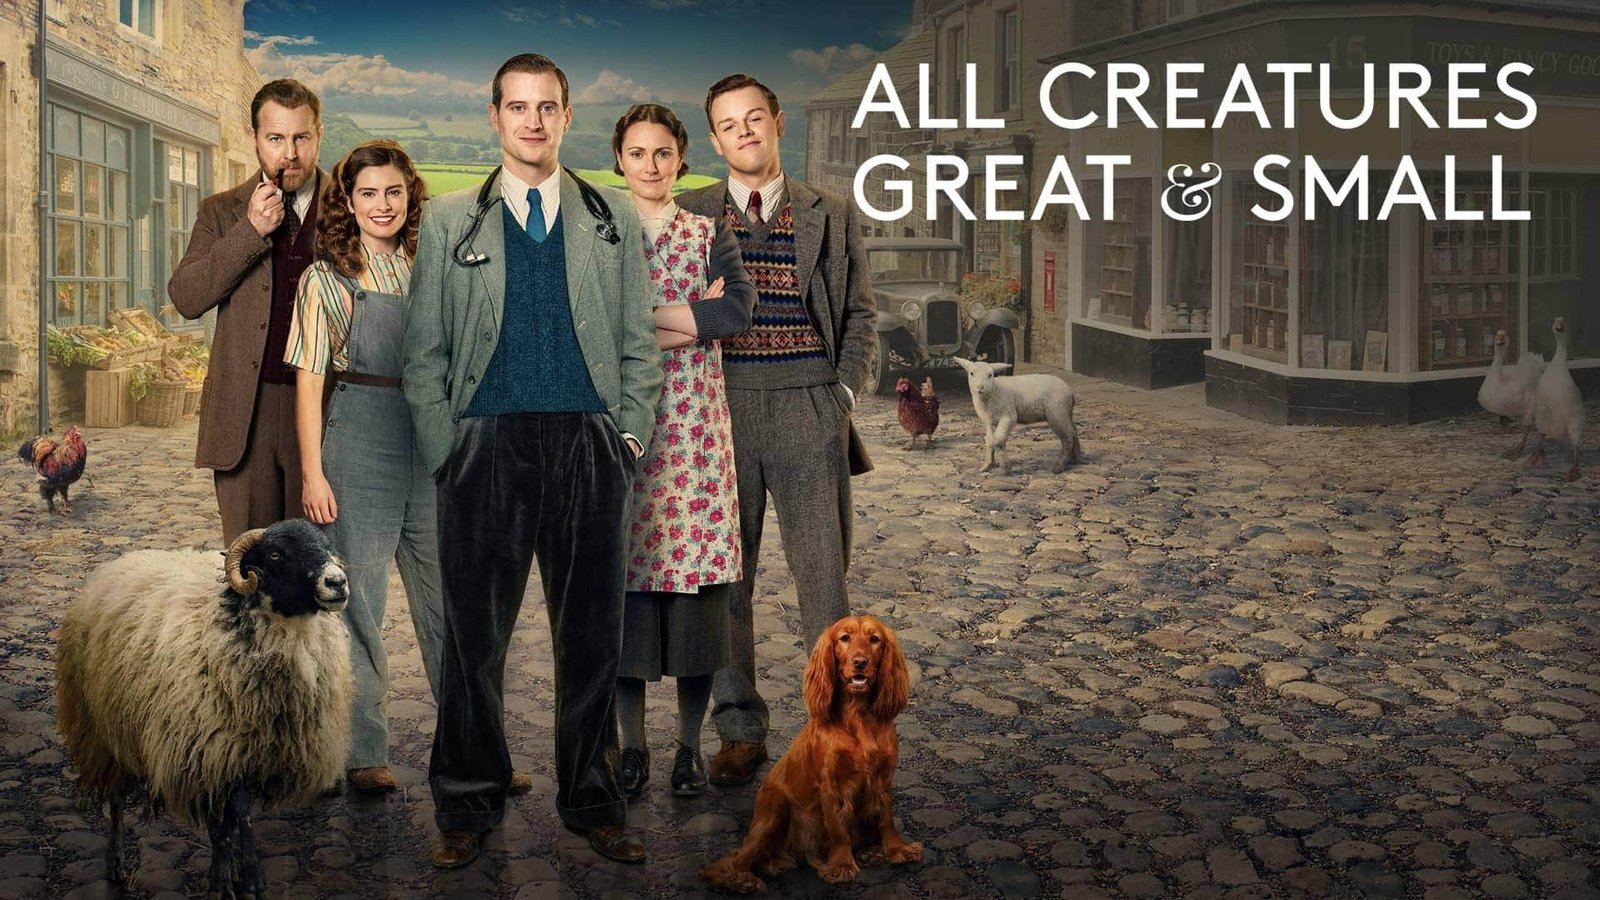 All Creatures Great And Small Season 3 Episode 7 Release Date